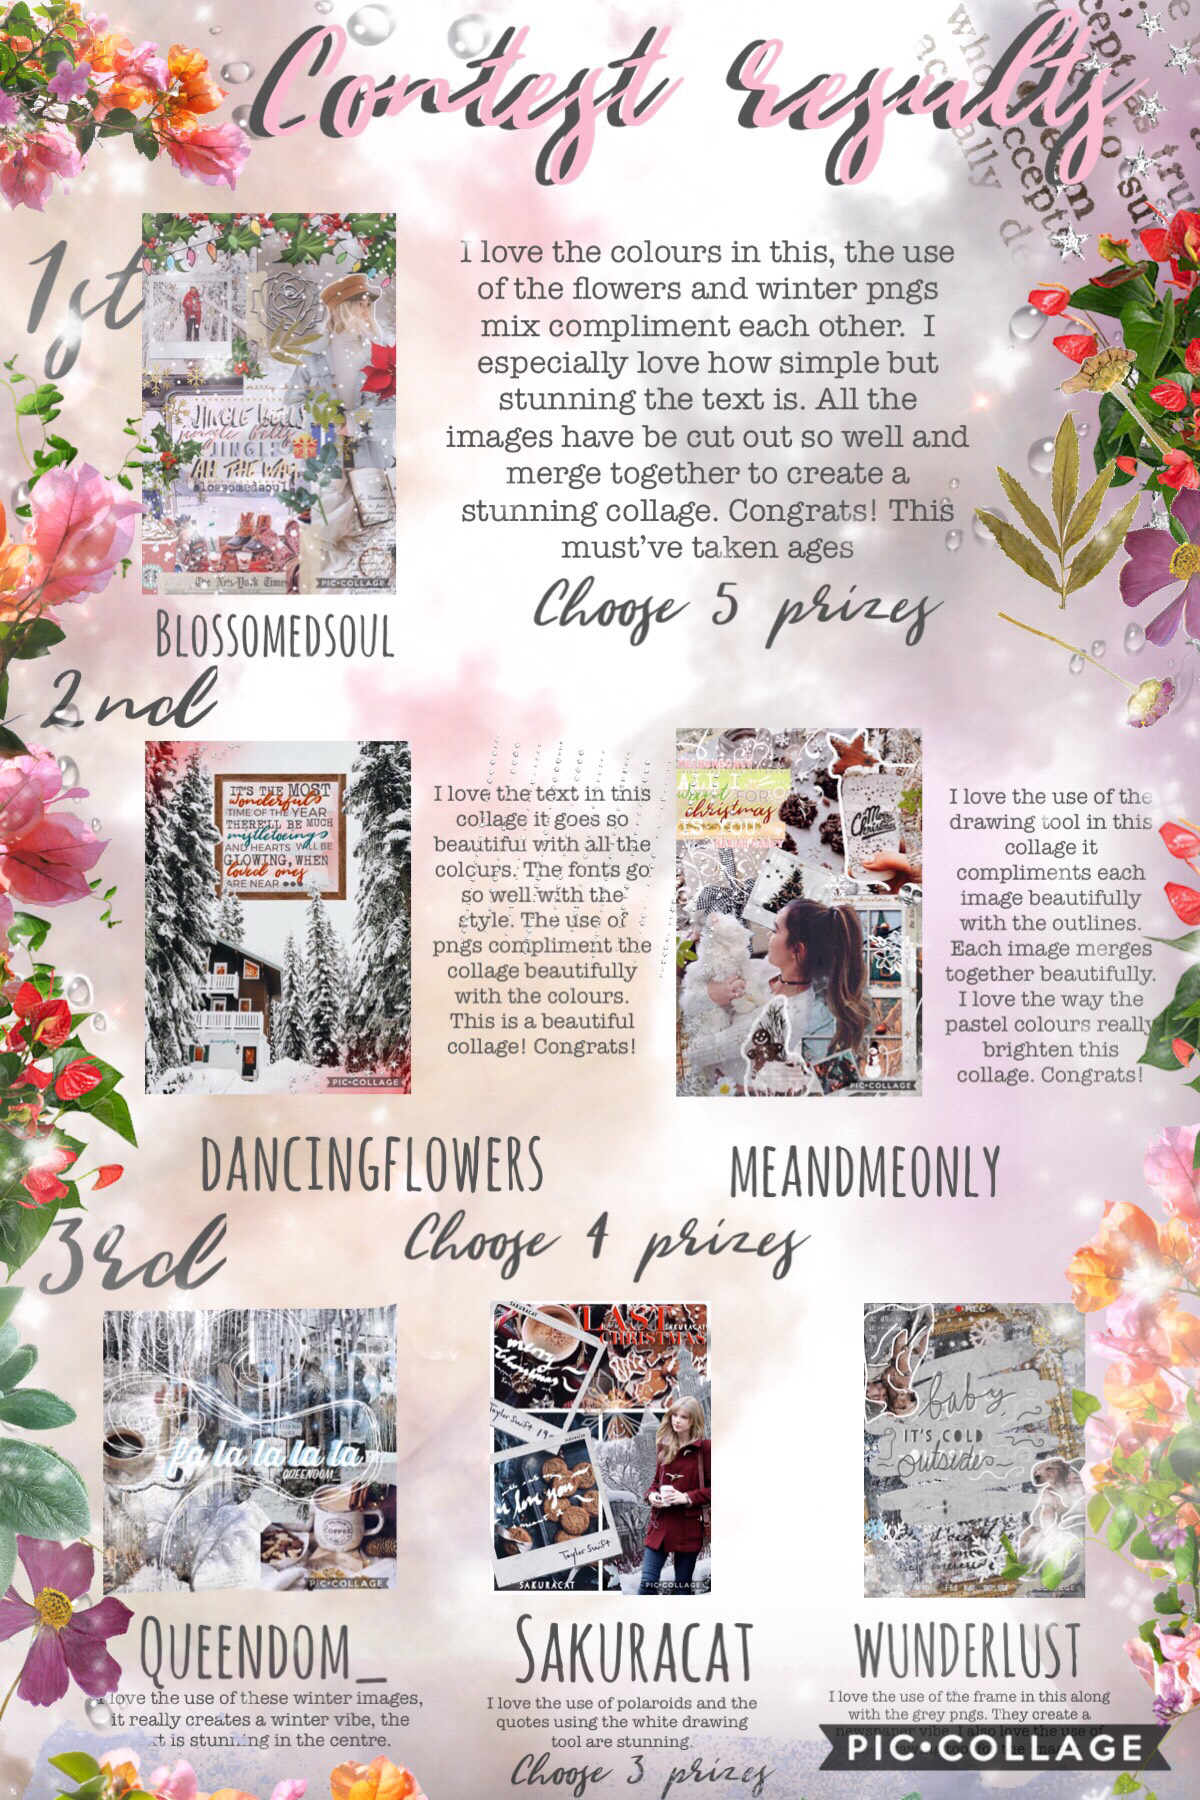 Contest results! 💓🎉
Sorry they are almost a month late I just couldn’t decide as each entry was stunning. I decided to do 1 first place, 2 second and 3 third. Prize options are in the remixes💗If you can’t read what I said about your collage let me know as